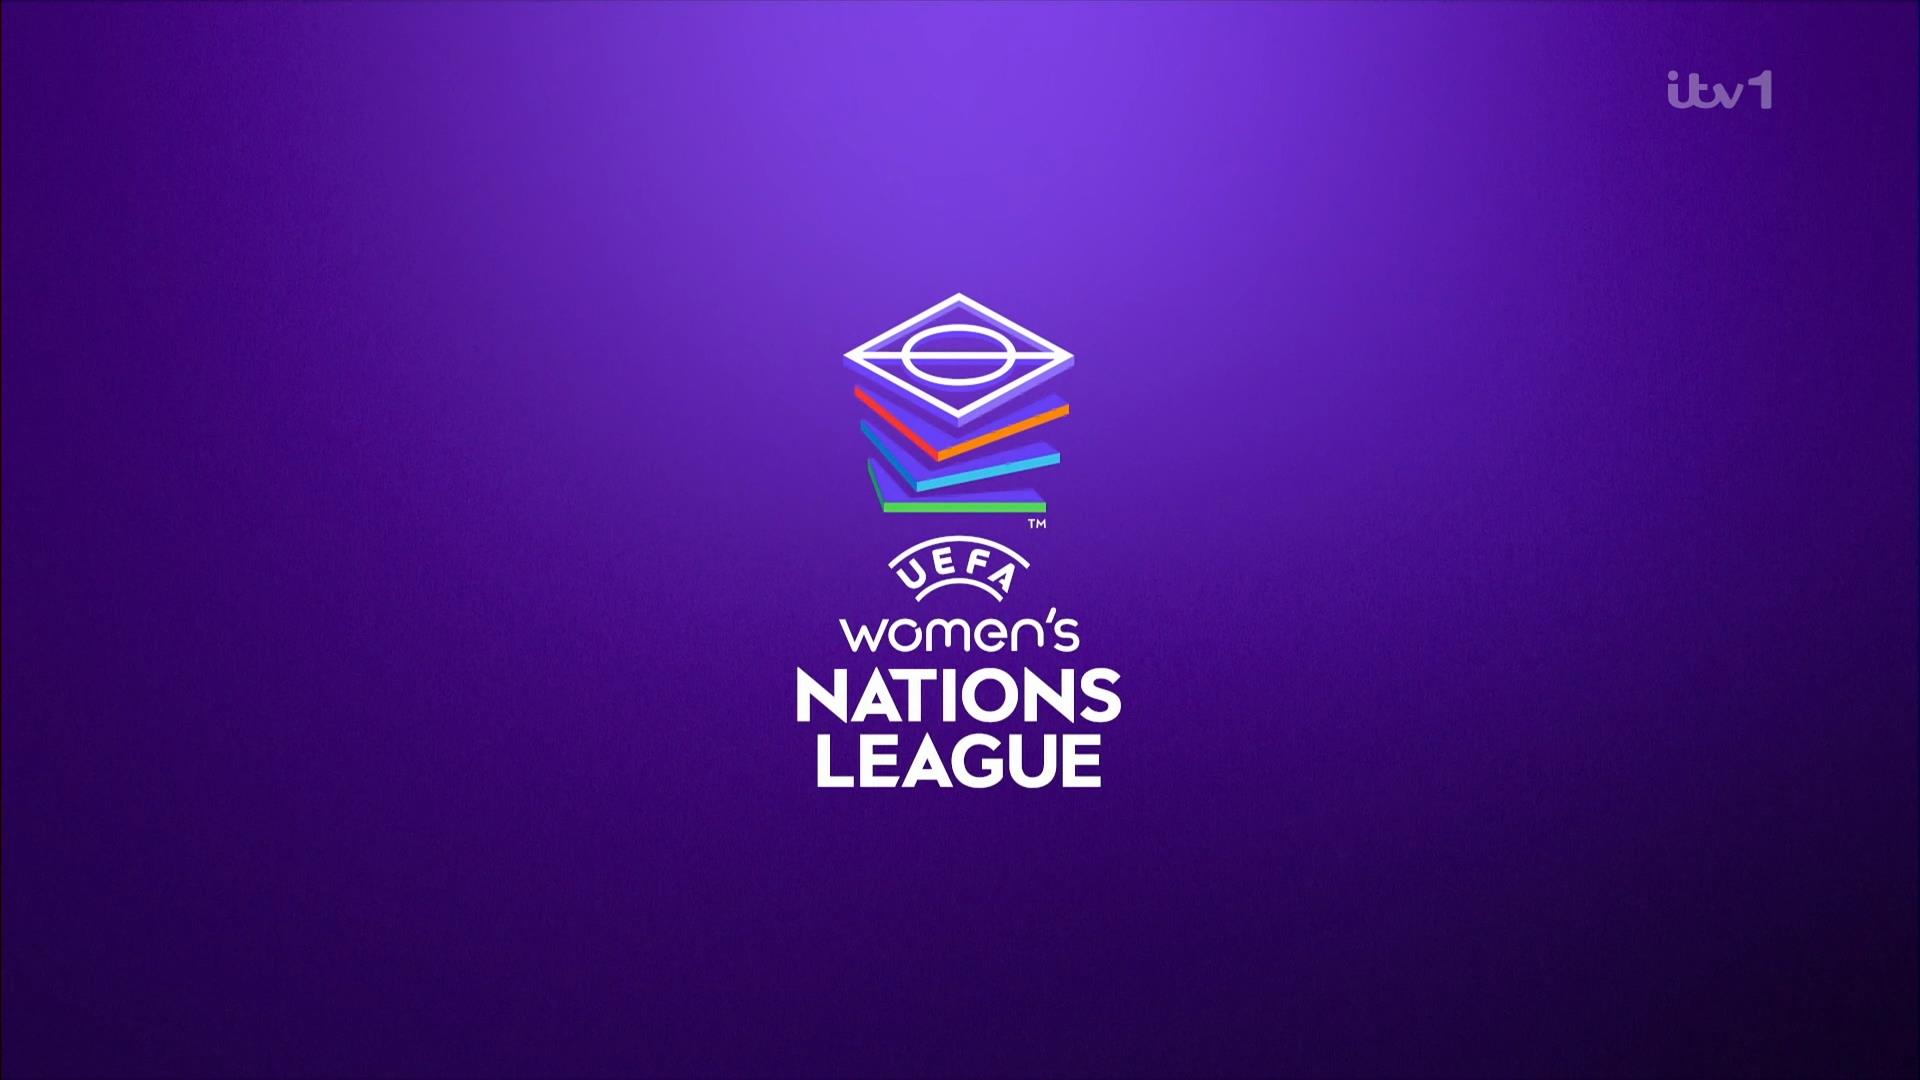 UEFA Womens Nations League – Live TV Coverage on ITV